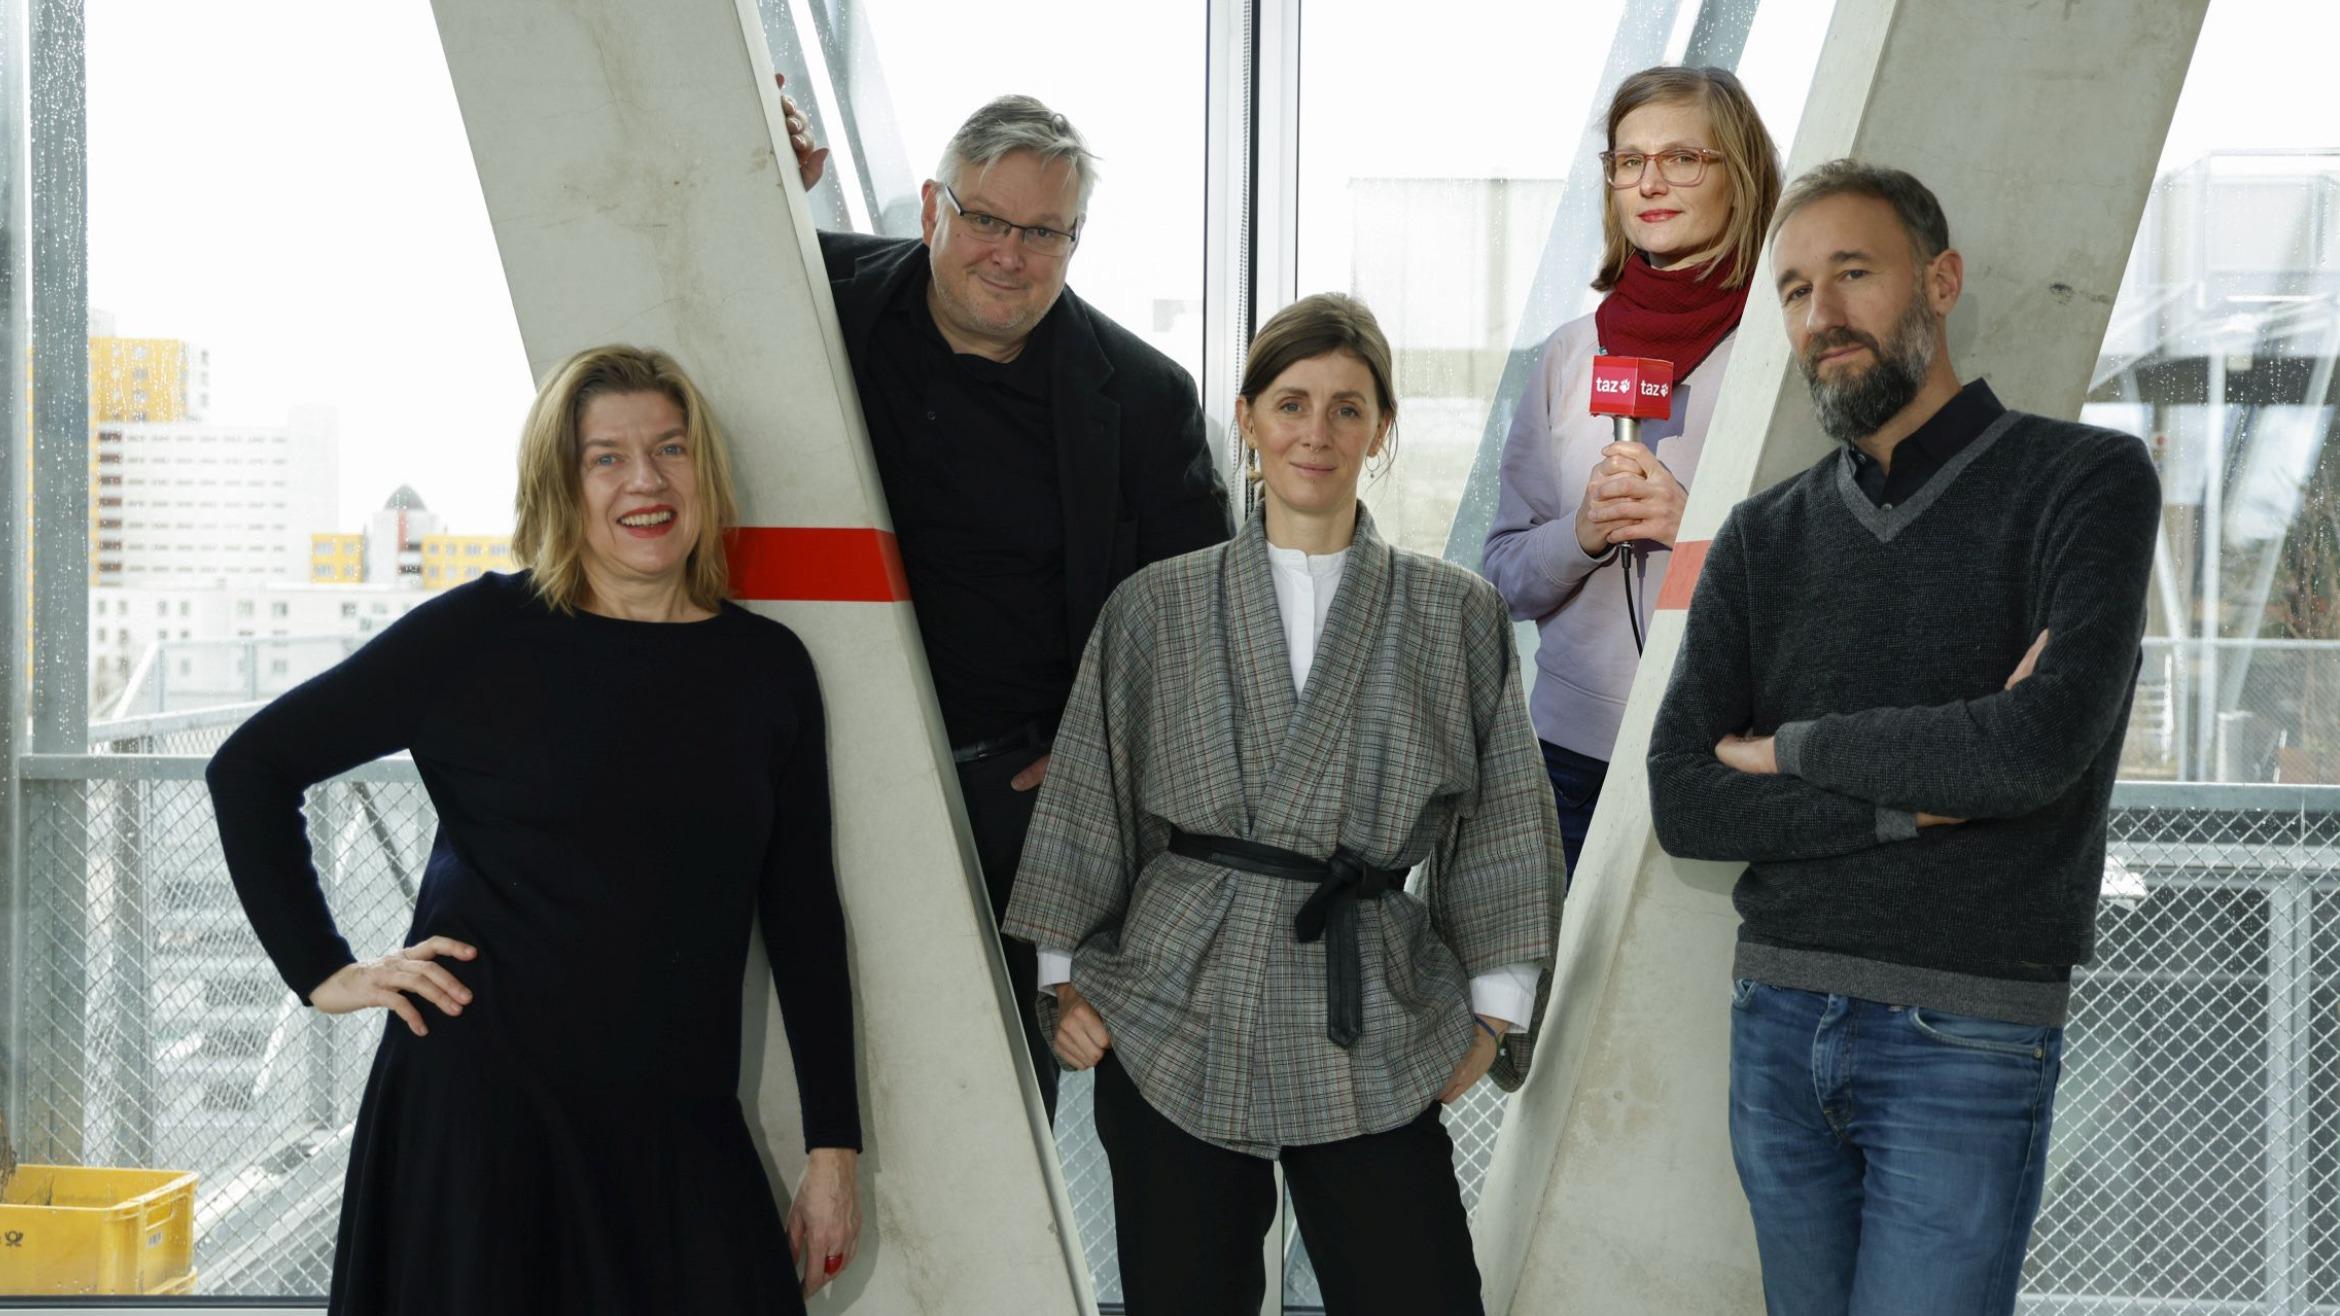 v.l.: Anja Mierel, Pascal Beucker, Aline Lüllmann, Anne Fromm, Andreas Marggraf – 